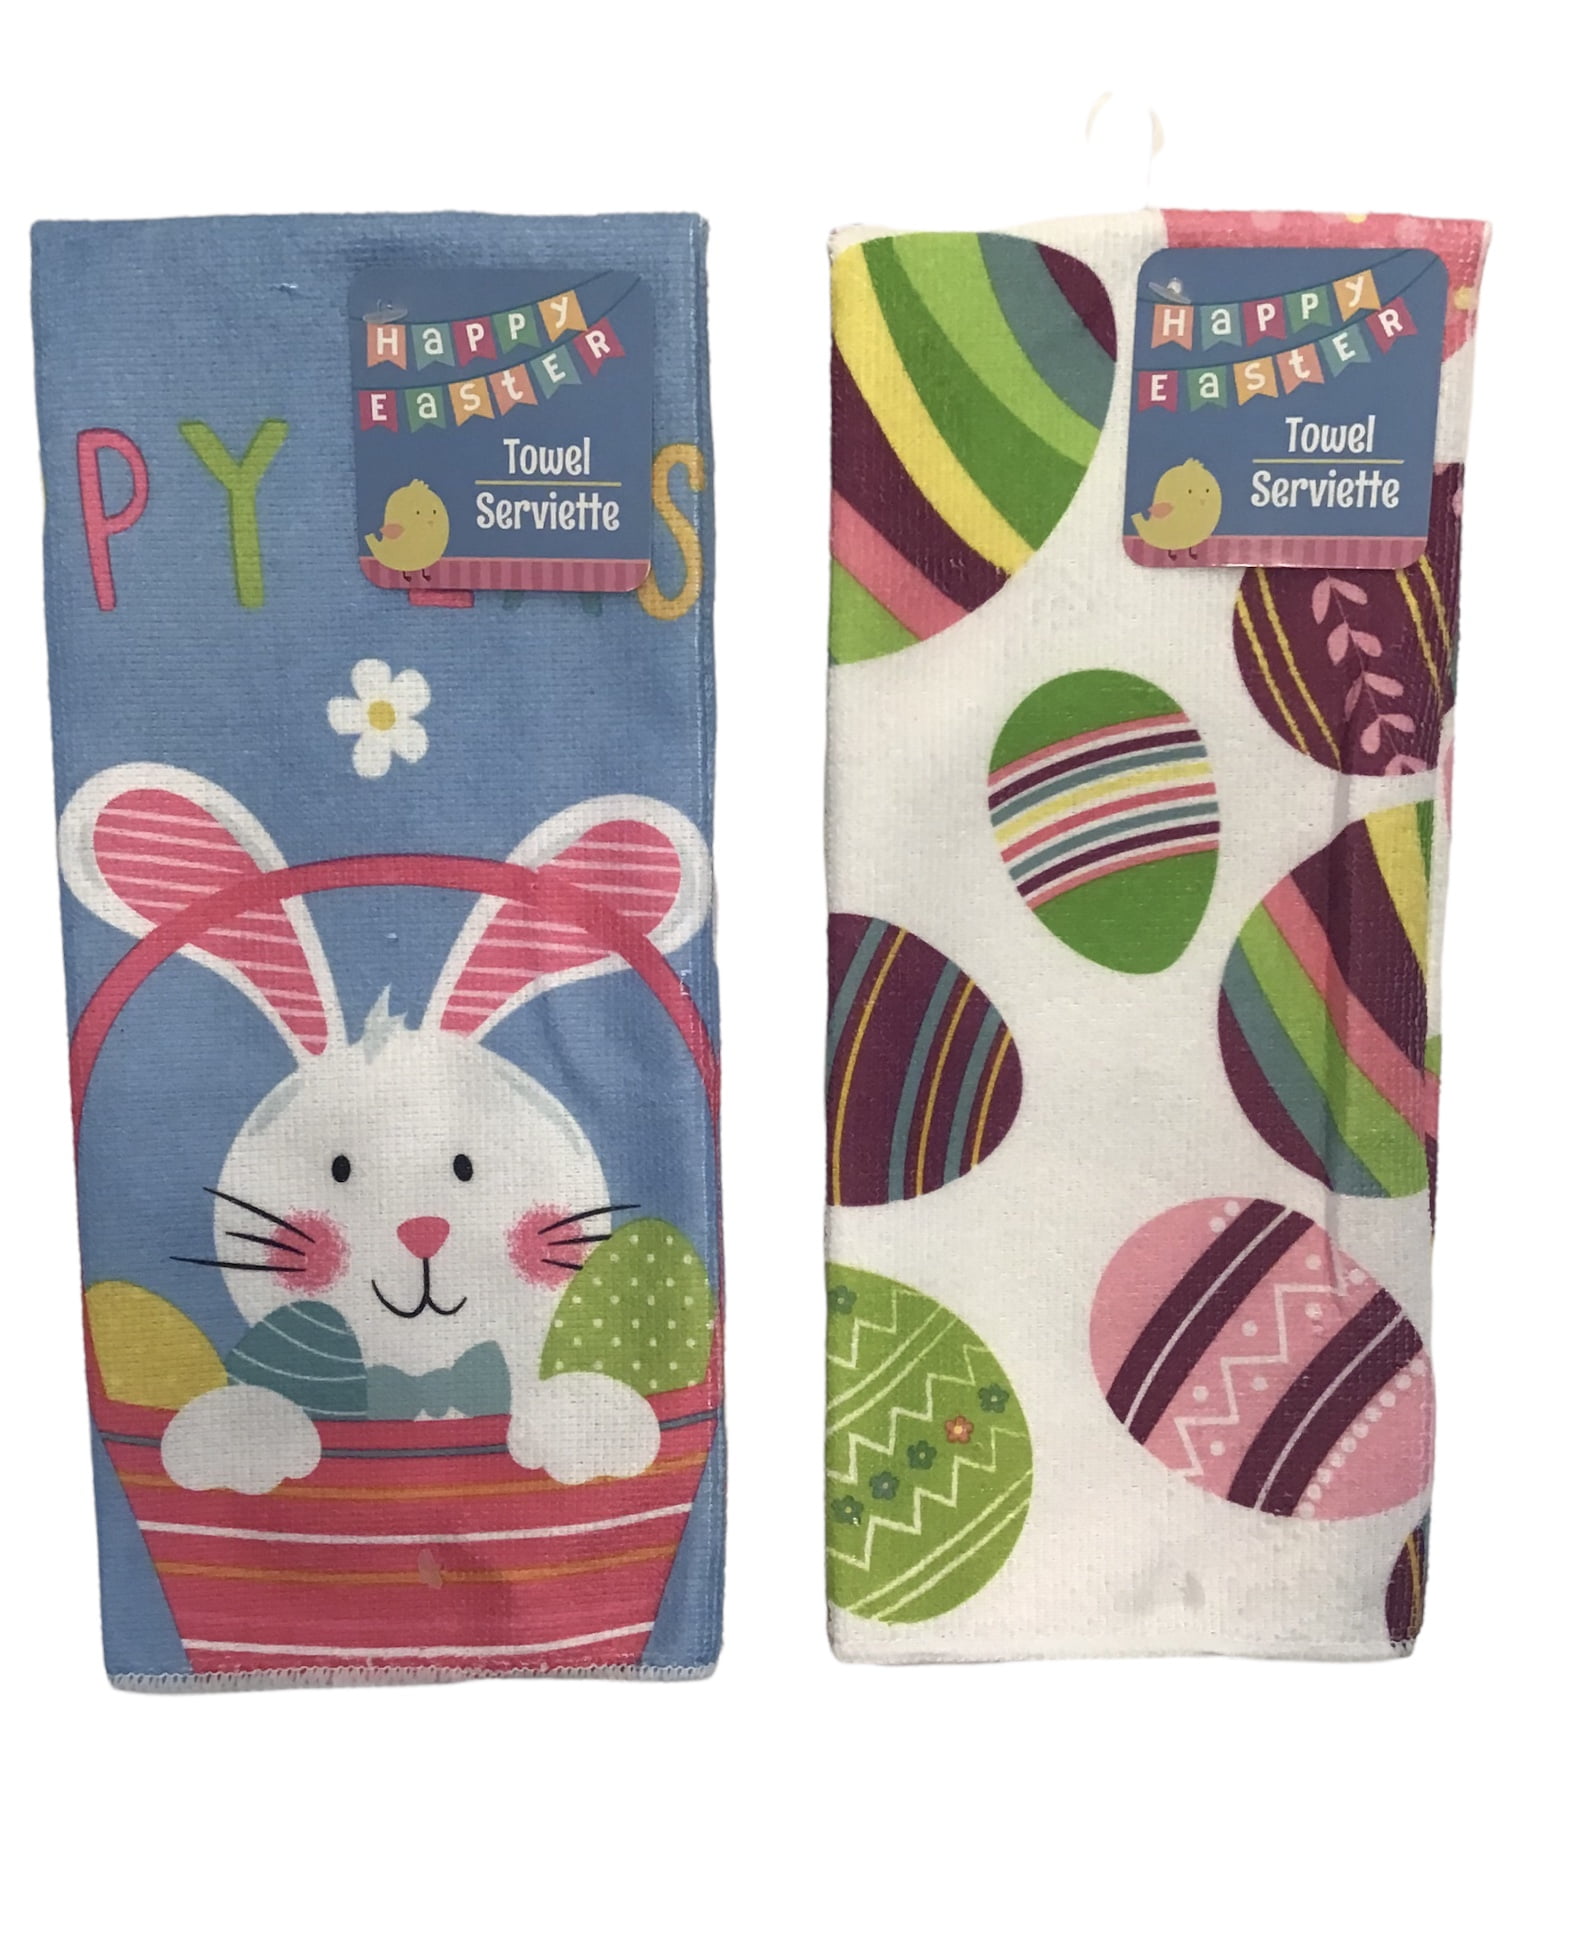 Easter eggs absorbent cotton large